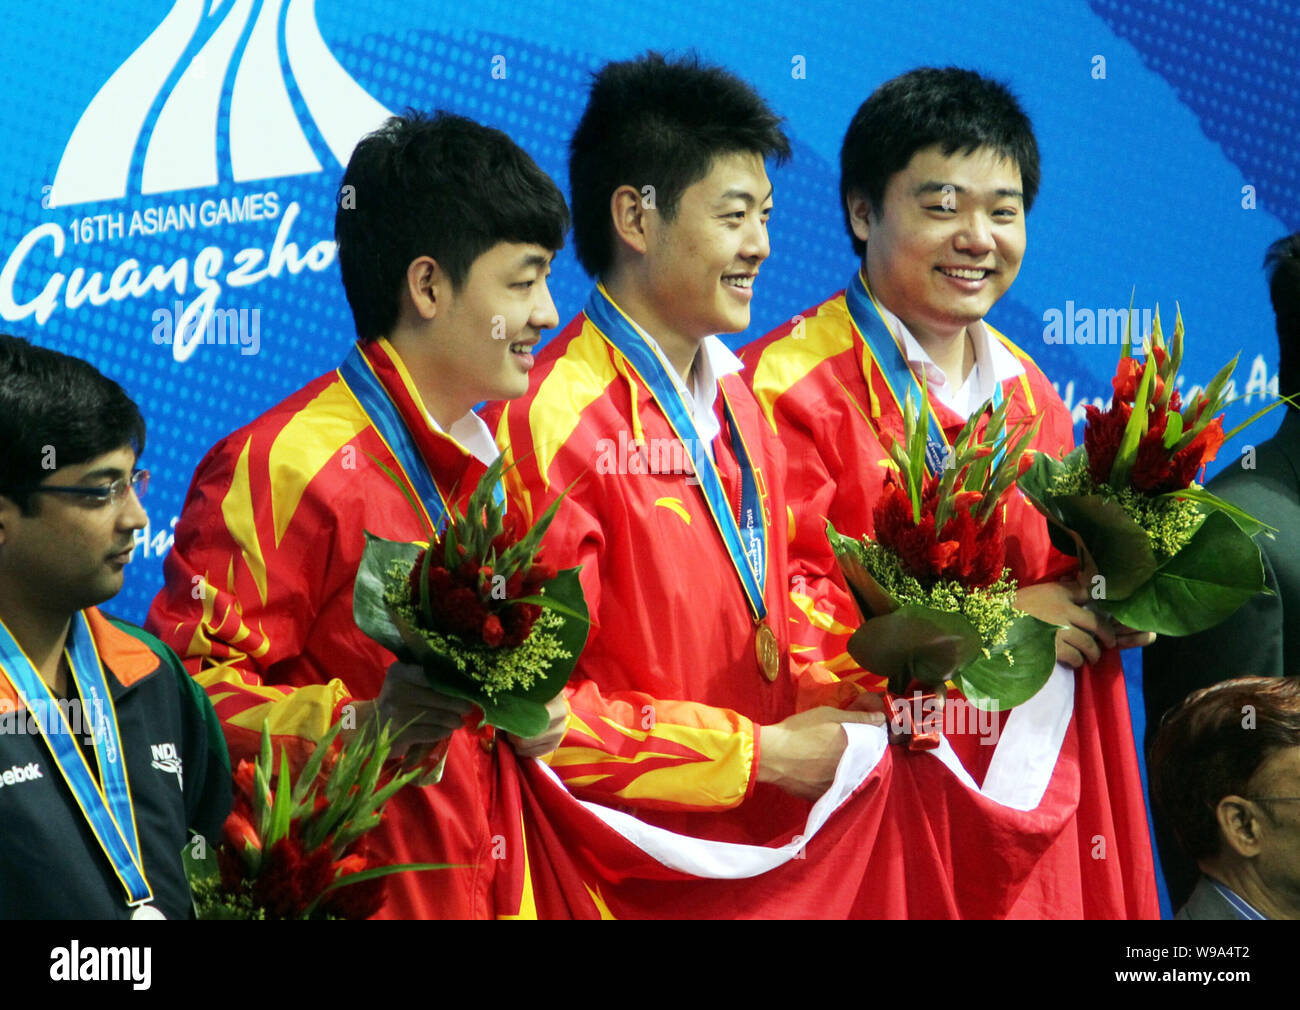 (From second left to second right) Chinas Tian Pengfei, Liang Wenbo and Ding Junhui (gold medalists) stand on the podium during the award ceremony for Stock Photo